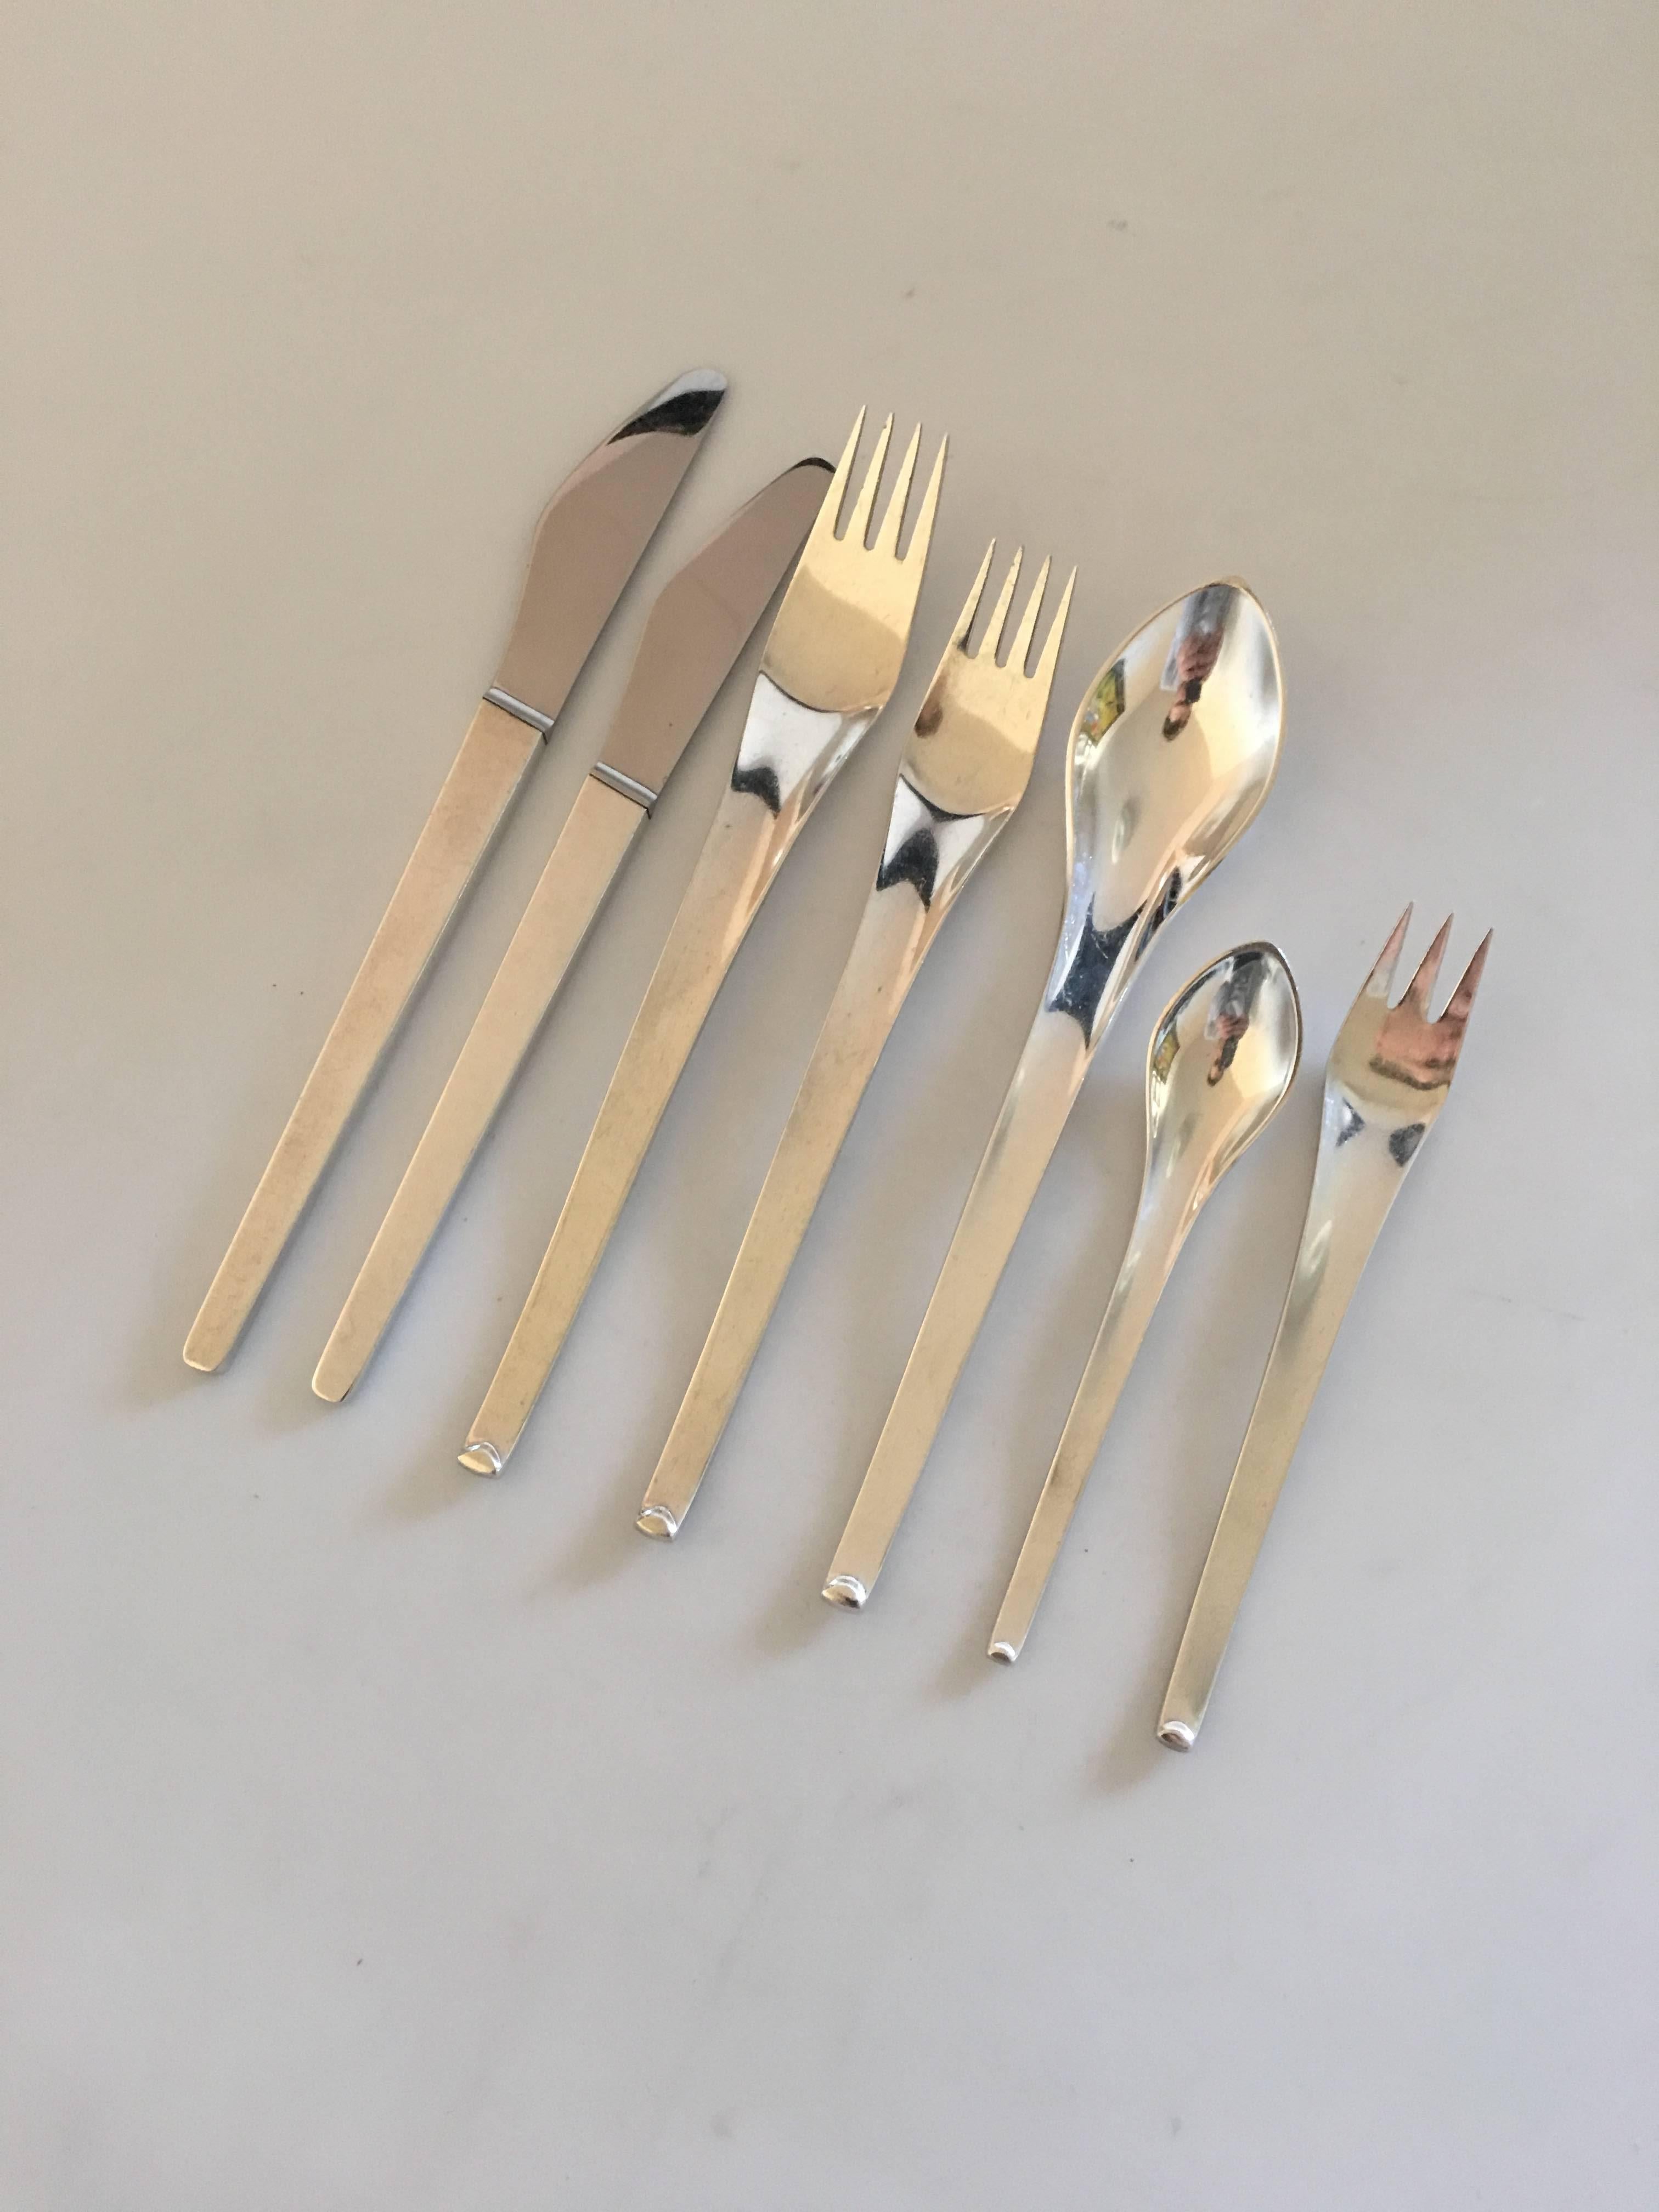 Hans Hansen line sterling silver flatware set for 12 Pers of 84 pieces. Consists of the following pieces; 

12 dinner knives 20.6 cm L (8 7/64